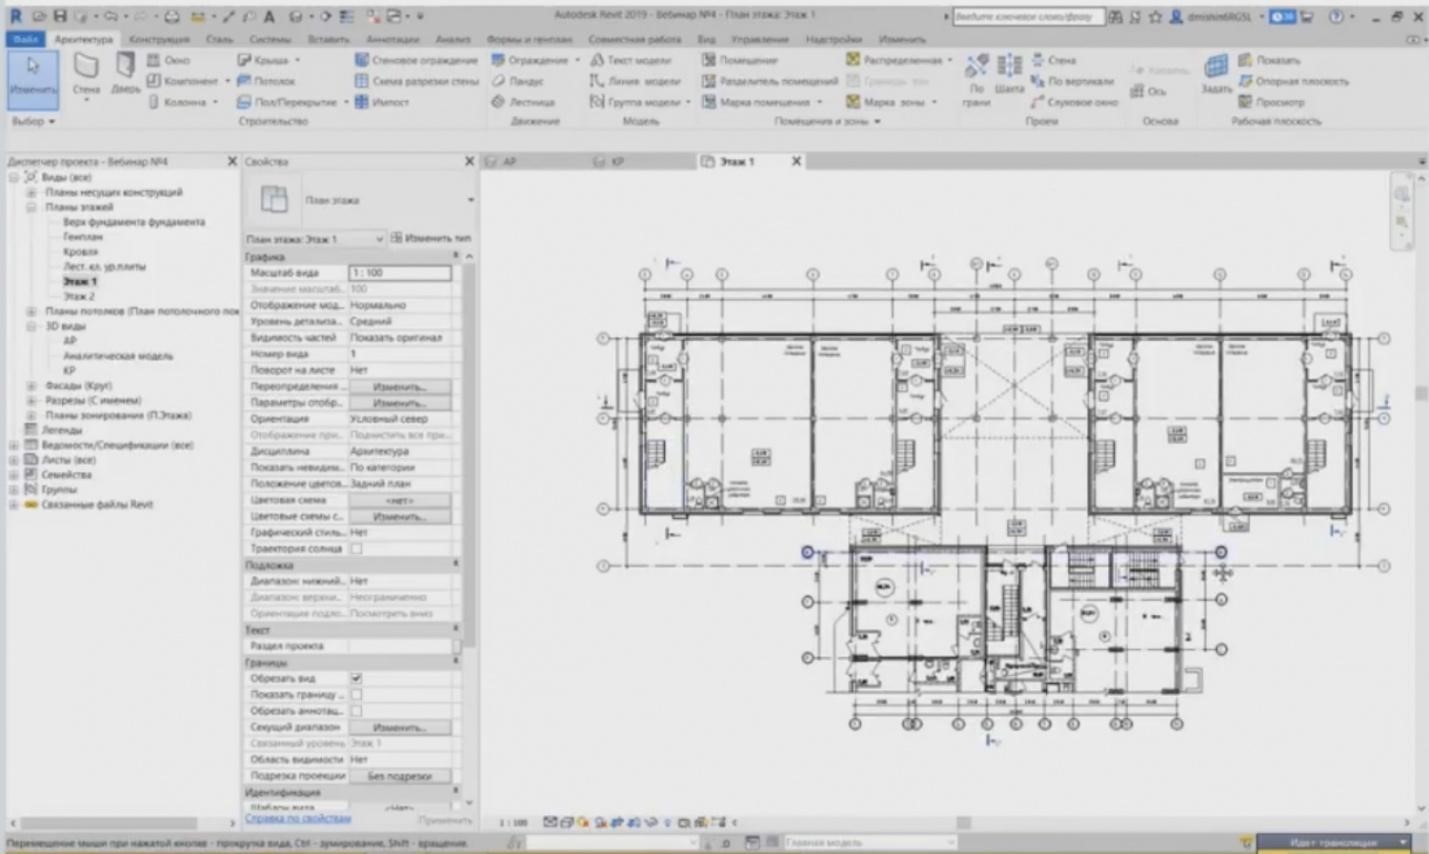 BIM DESIGN IN REVIT. CREATING ARCHITECTURAL AND STRUCTURAL ELEMENTS. PAGE 2-2